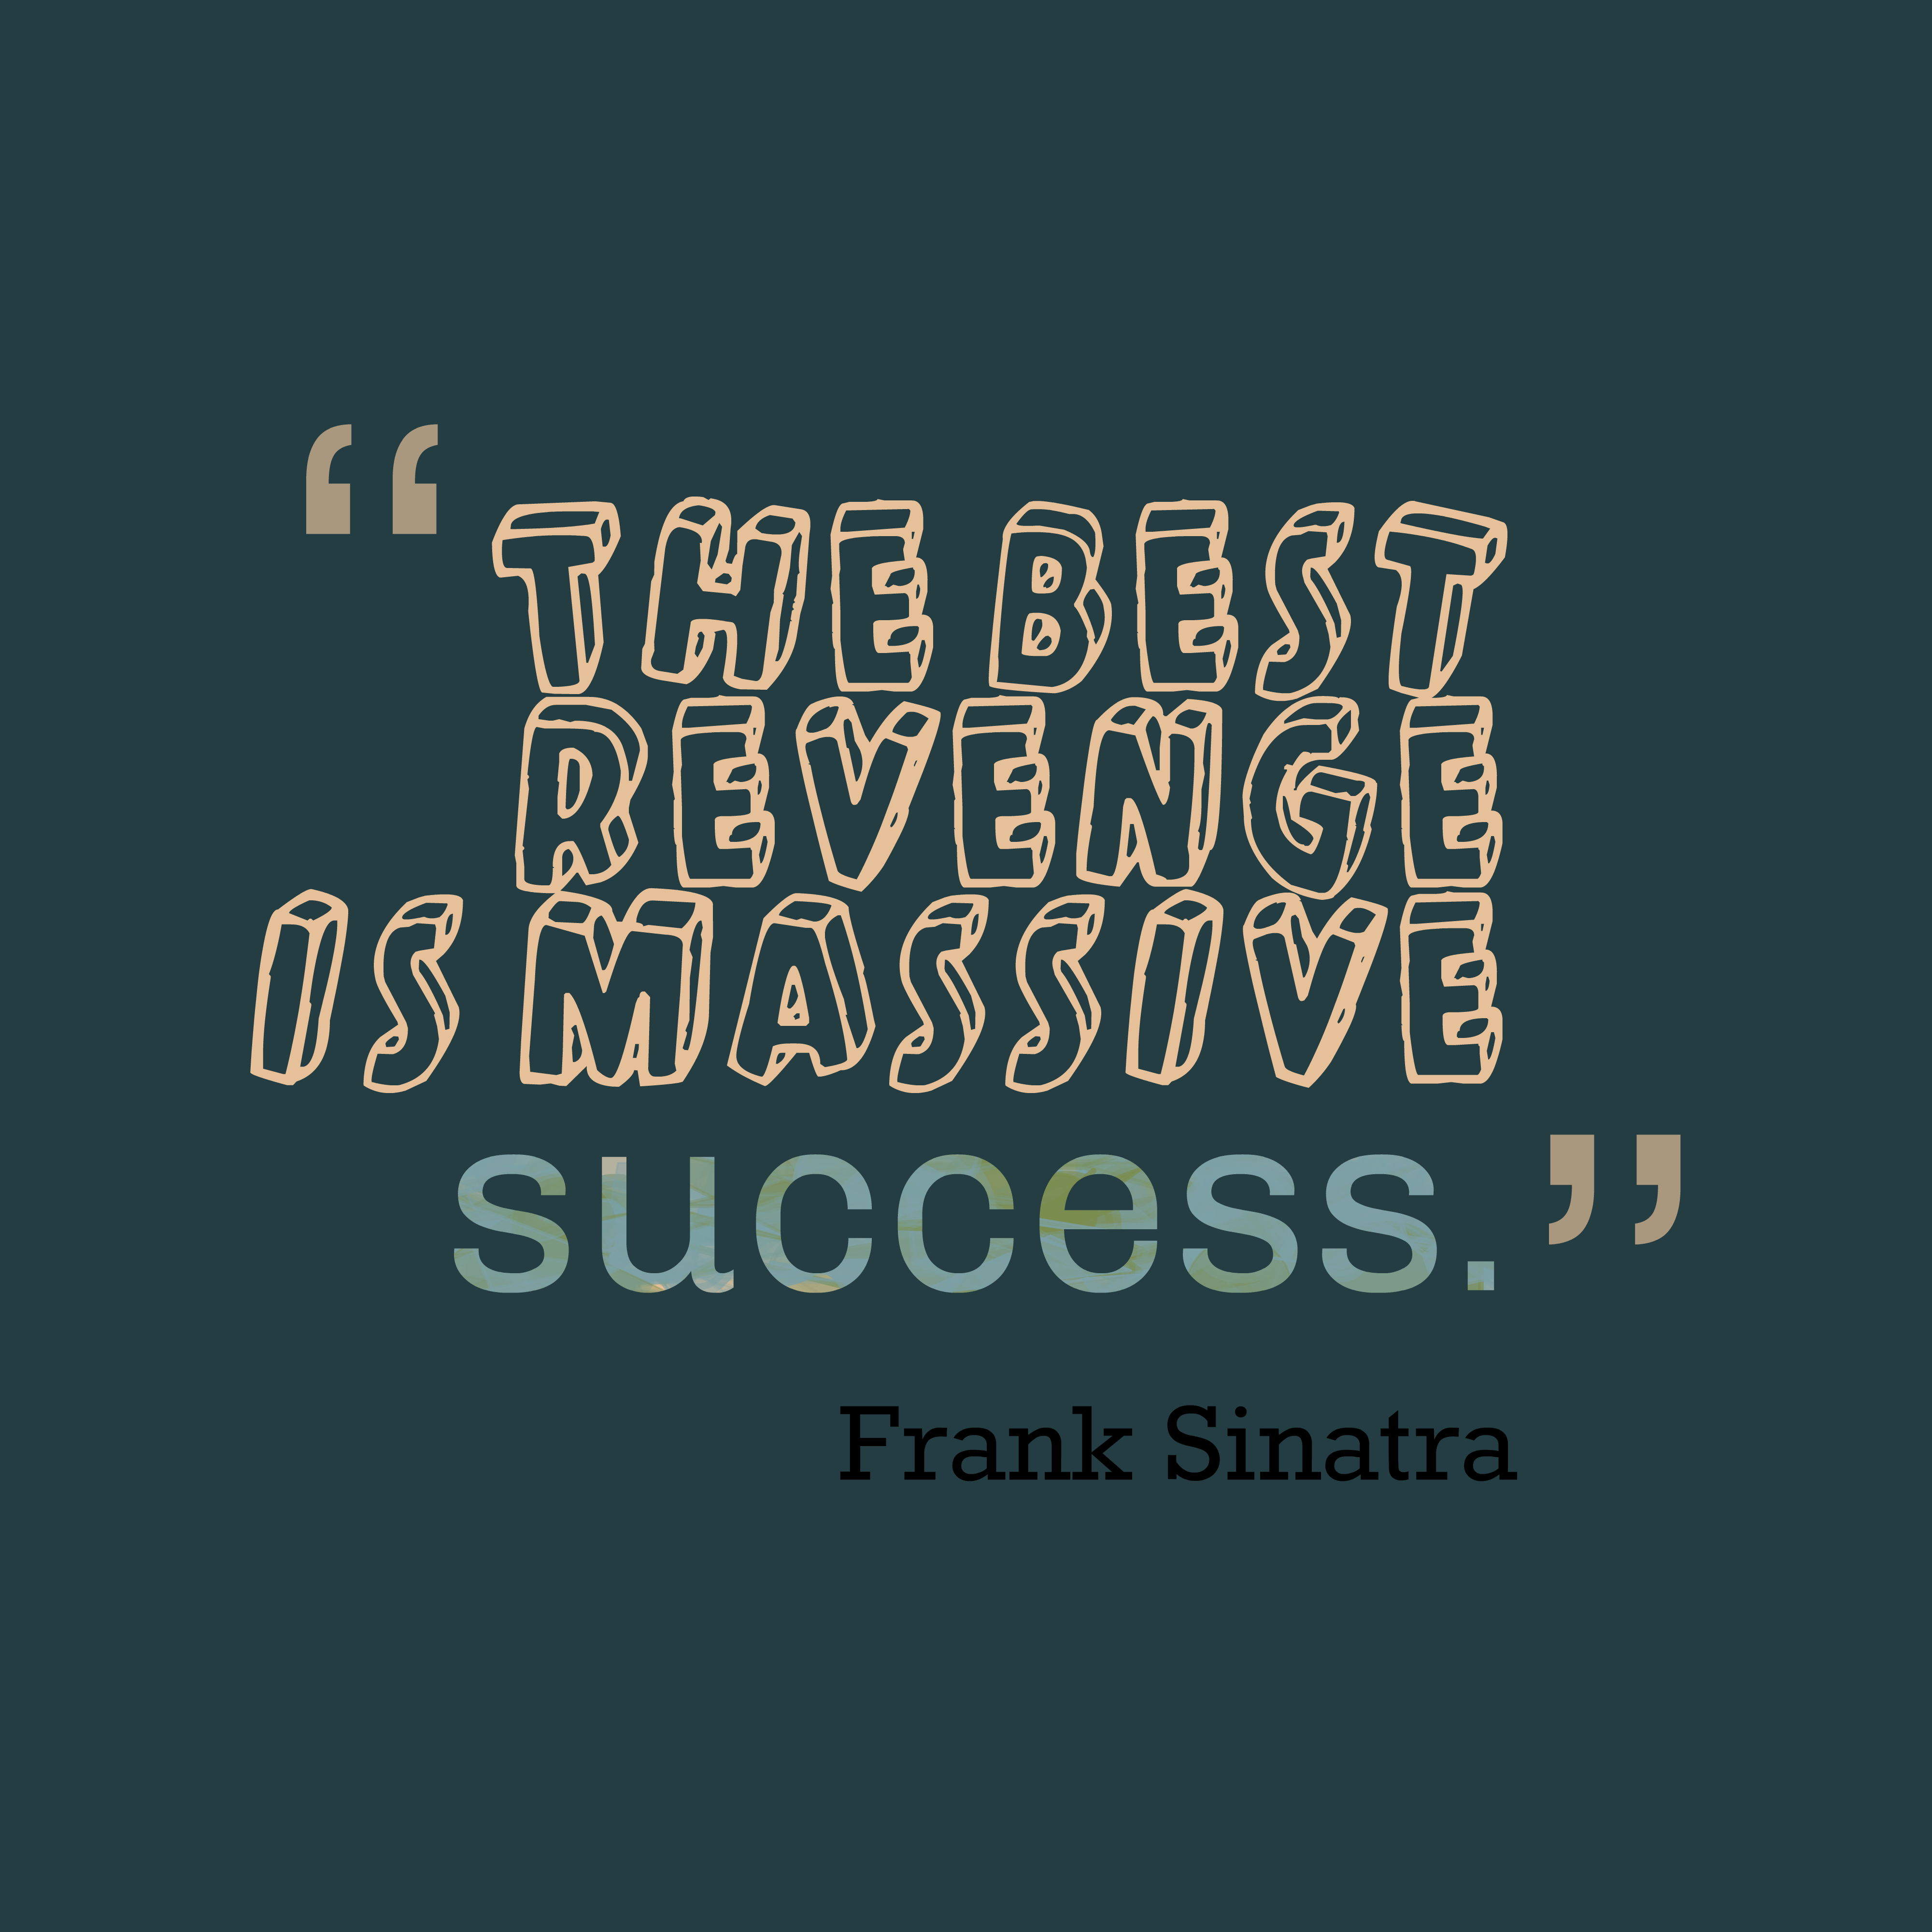 Frank Sinatra quote about revenge